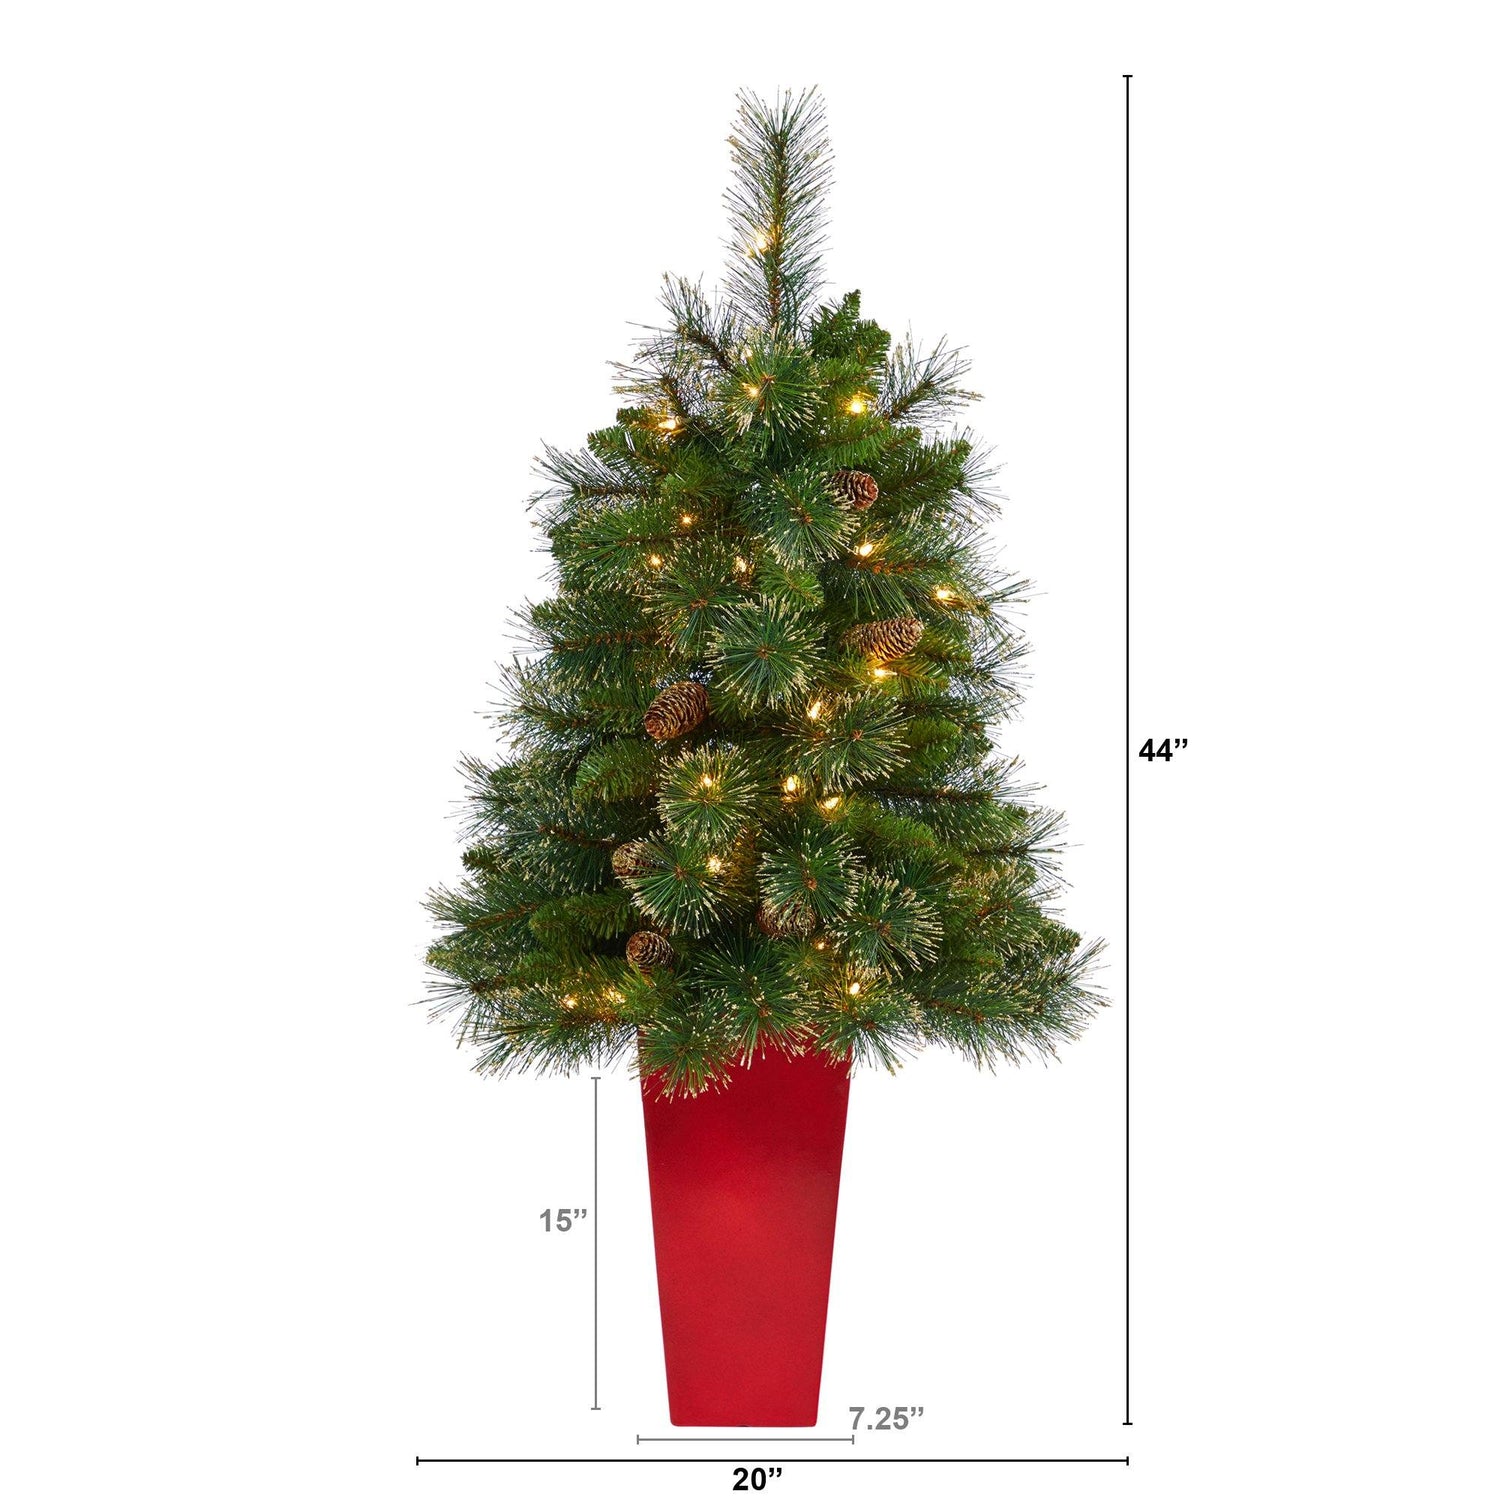 44” Golden Tip Washington Pine Artificial Christmas Tree with 50 Clear Lights, Pine Cones and 148 Bendable Branches in Red Tower Planter